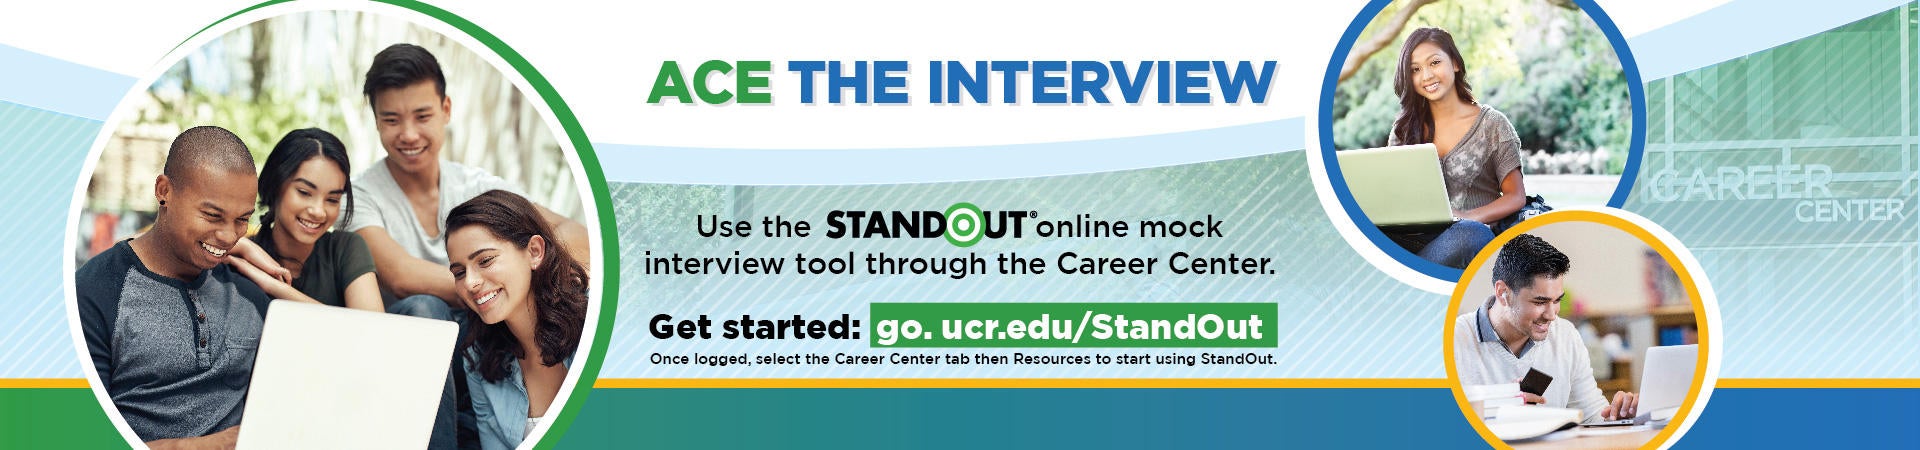 Use StandOut Interview tool. Get started at go.ucr.edu/StandOut